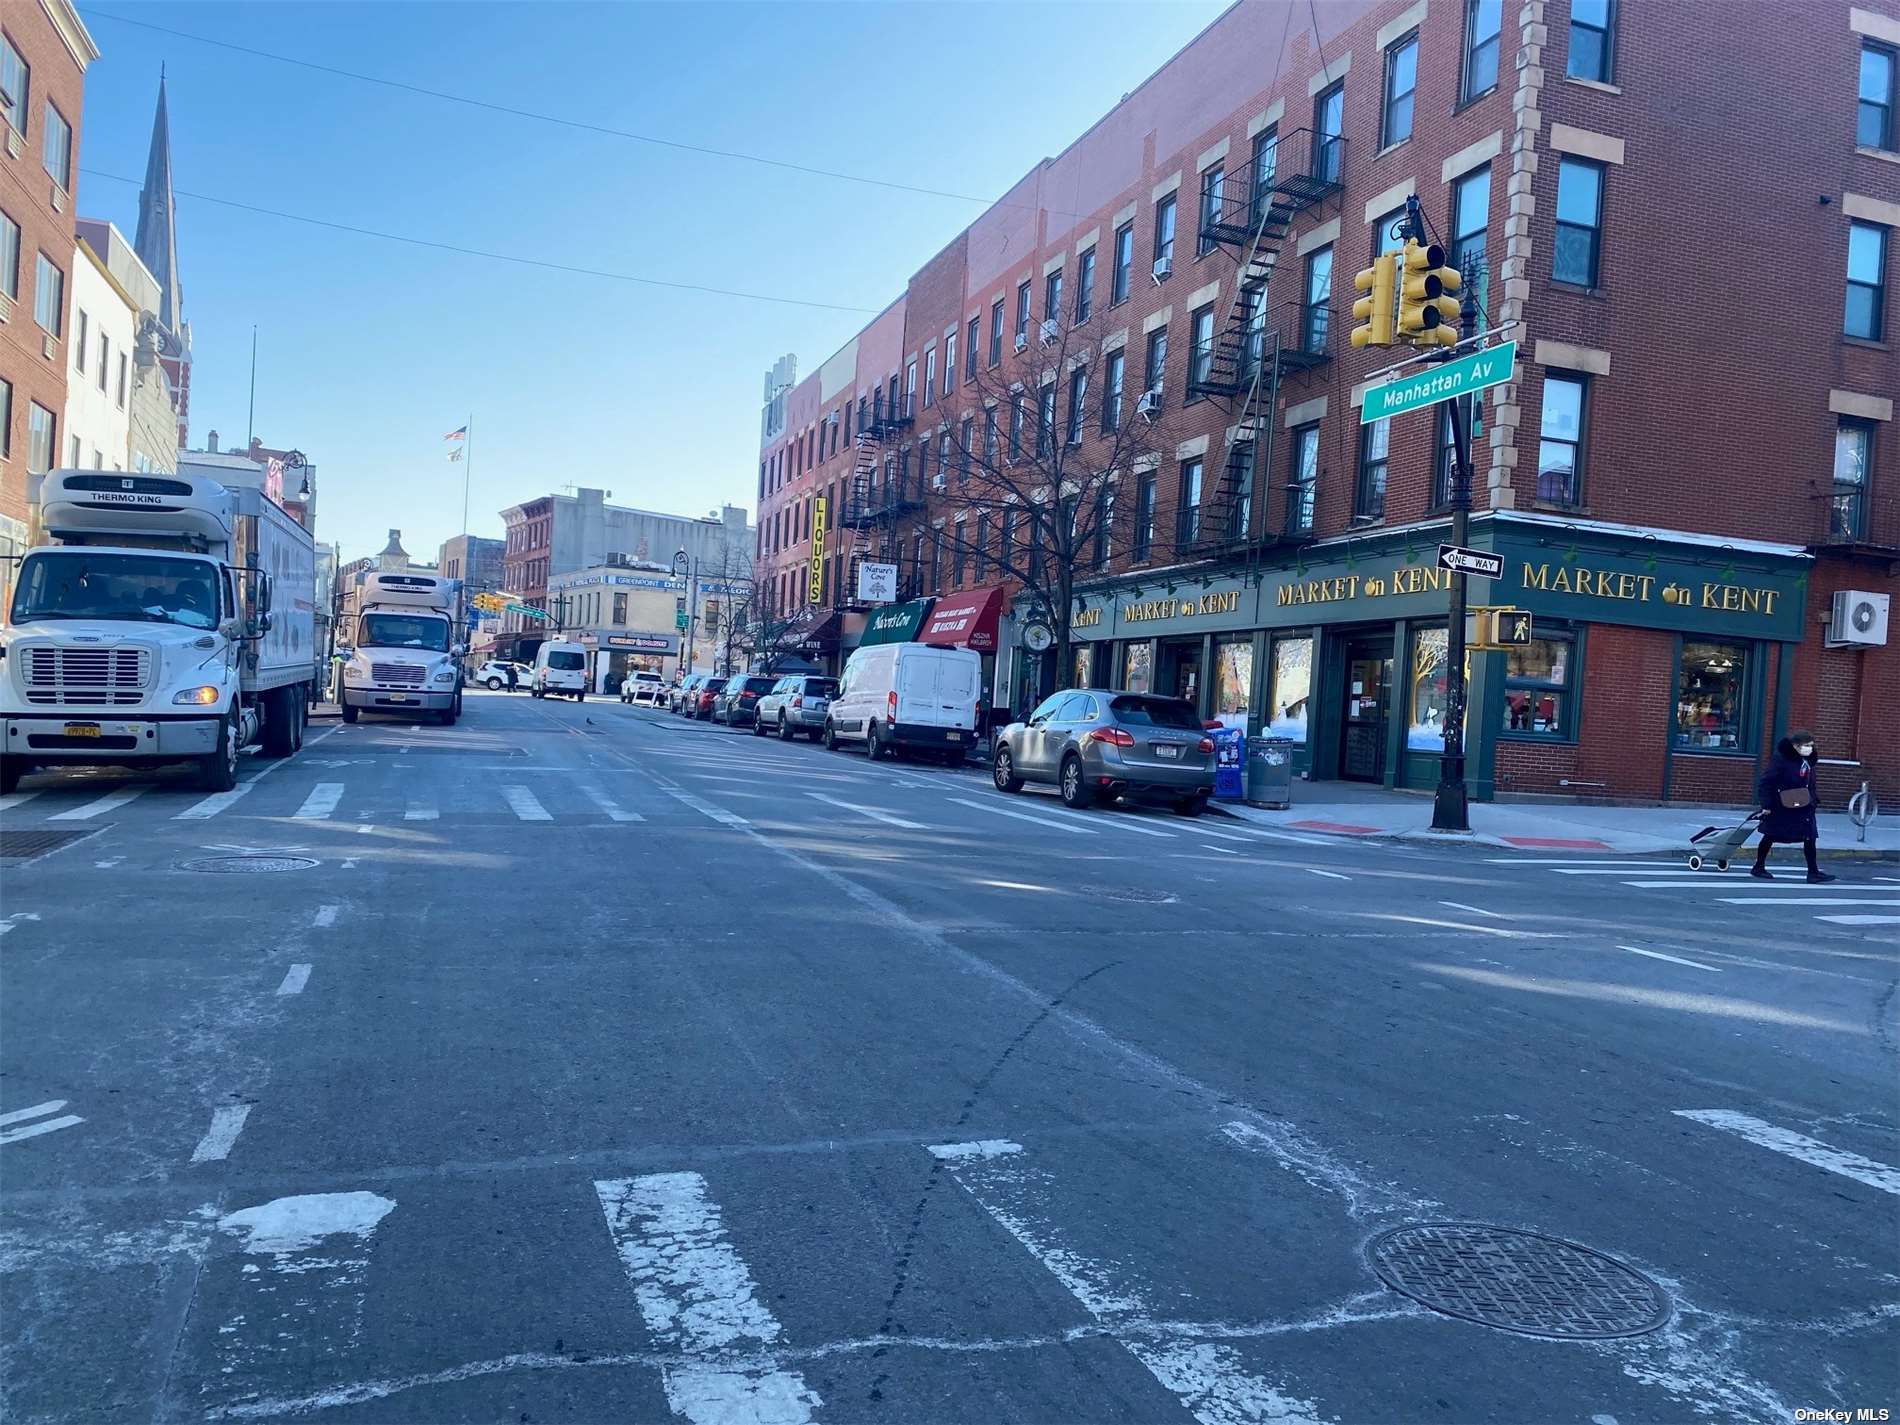 Great Opportunity To Build in Brooklyn/Greenpoint! Excellent Investment and Development Opportunity To Purchase 3 Story building. Can obtain approval plans to build 4 Story plus penthouse on 5th Floors 7unit w/ elevator and possible conversion to condo! Prime location, 1 block to G Train and Major Transportation. Delivered vacant! Do not miss this great offer!